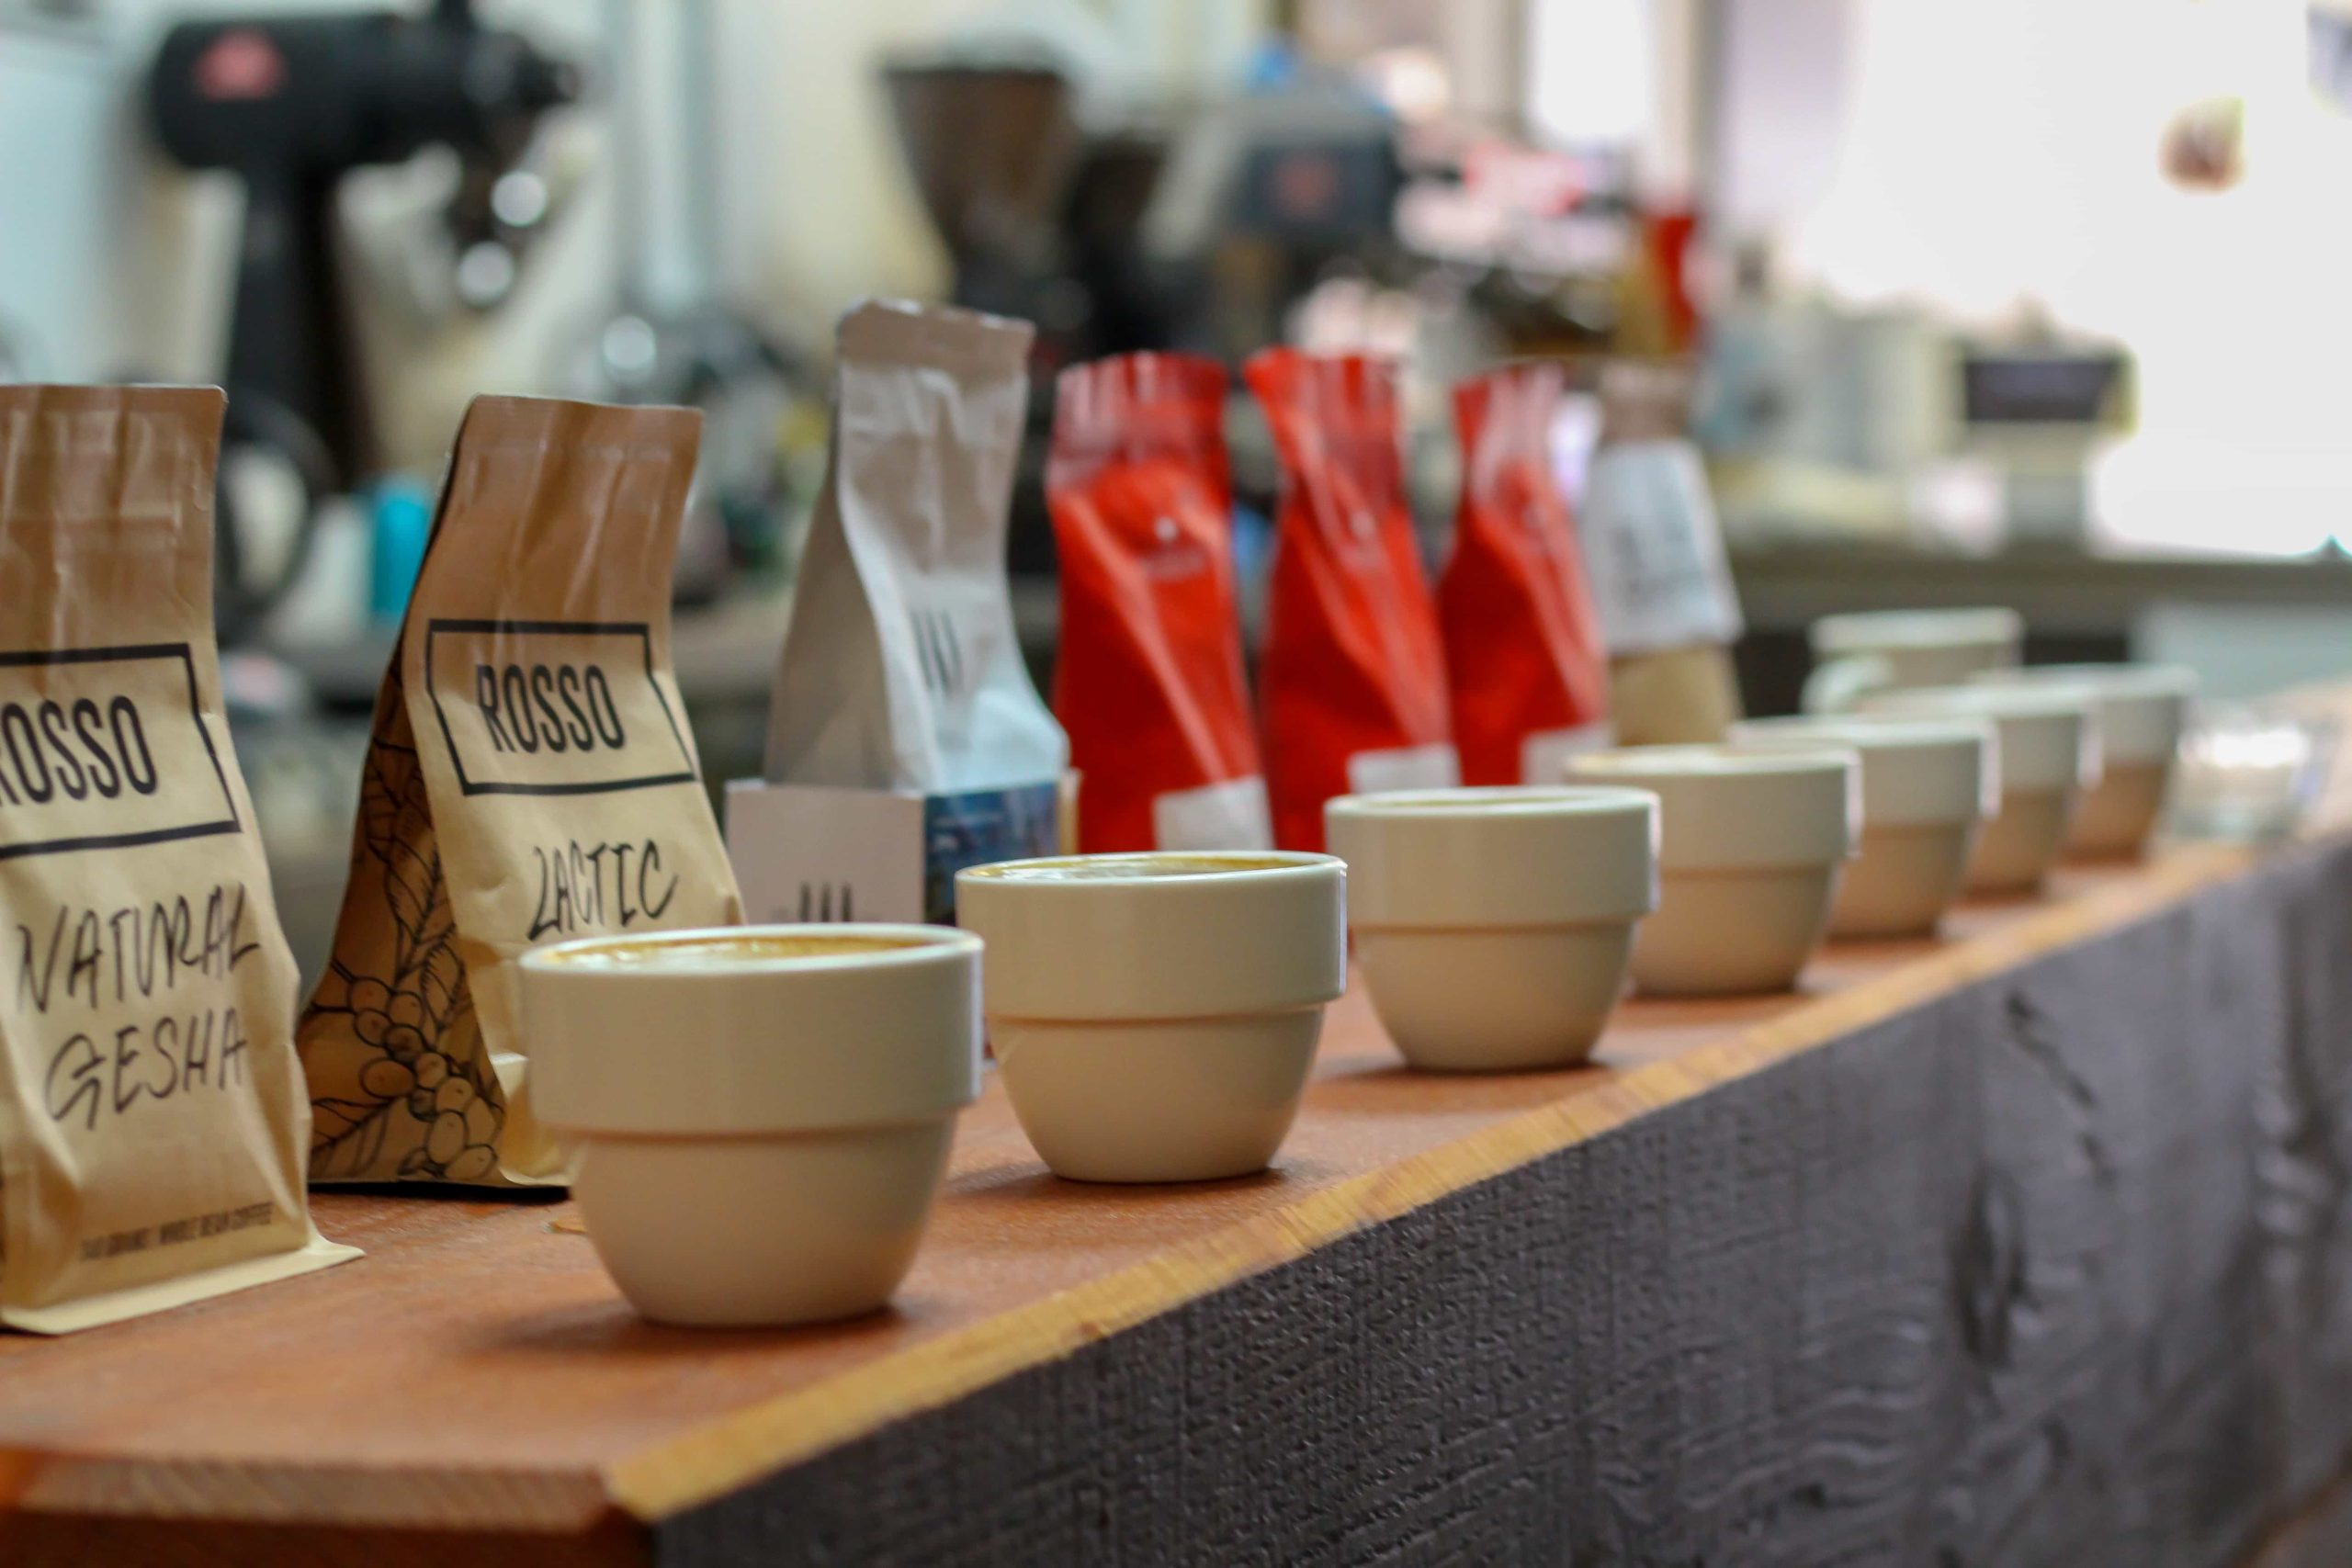 Vancouver's biggest cupping event to be held next week